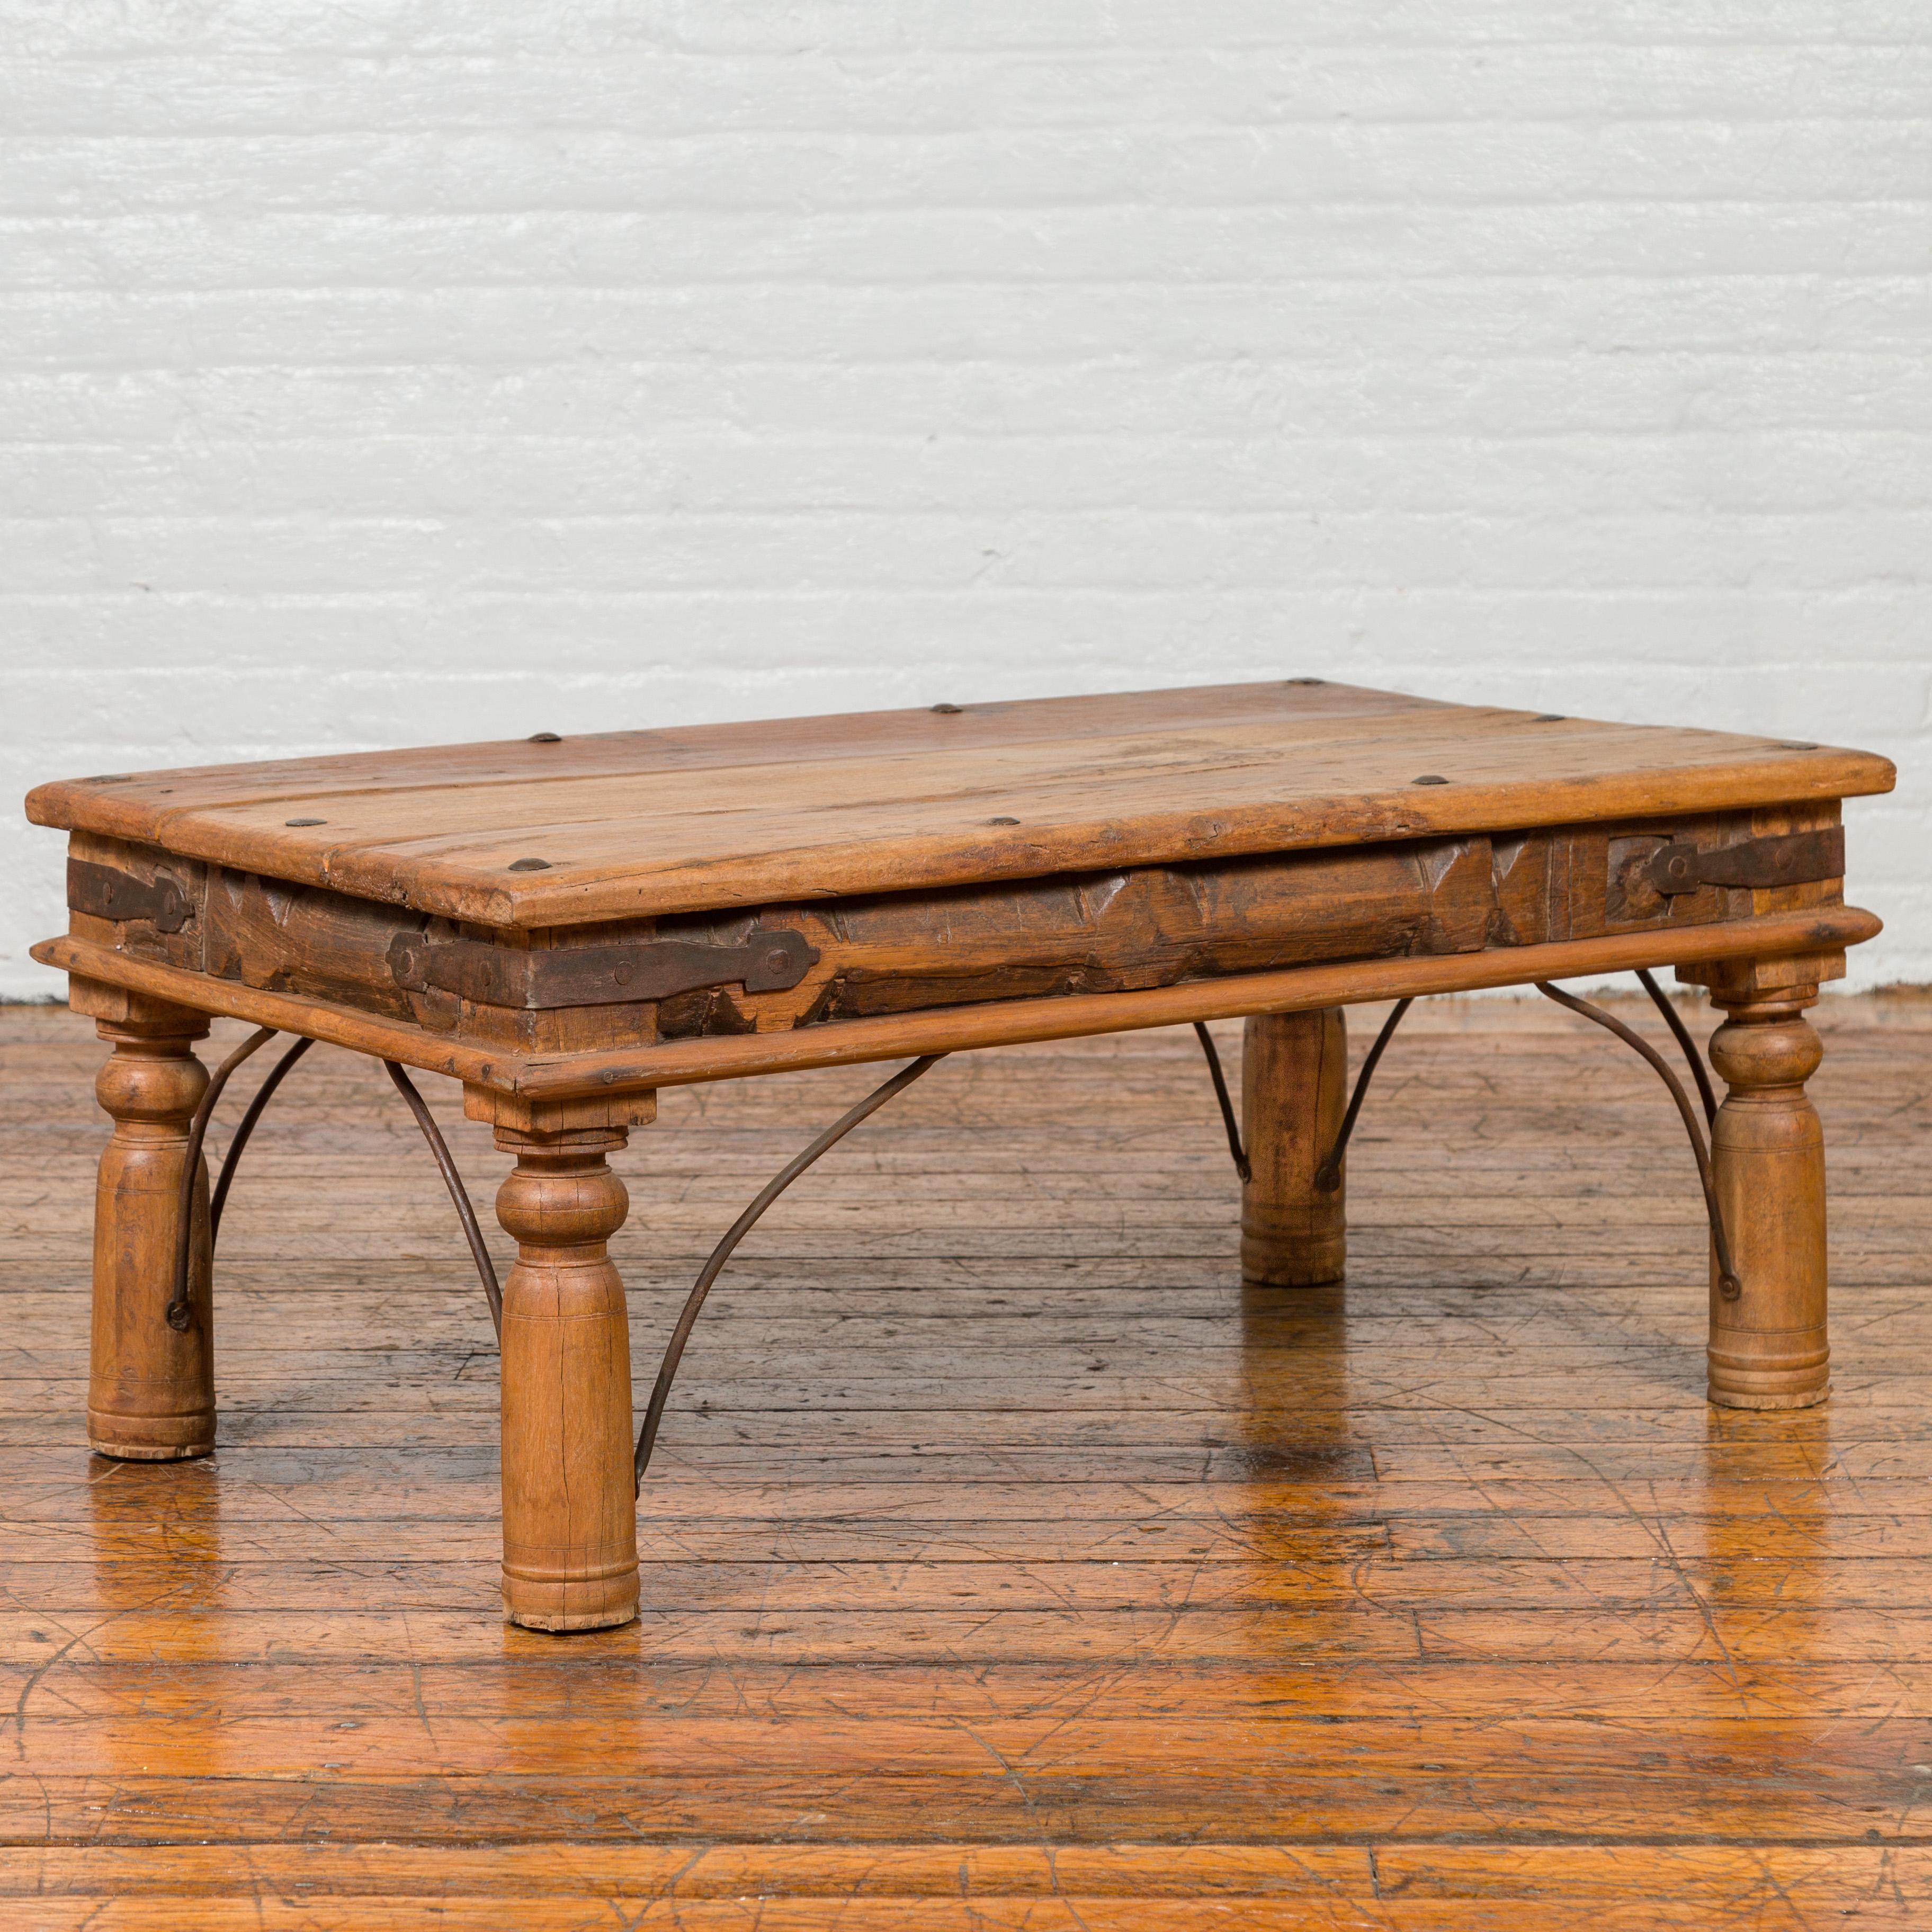 Rustic Indian Sheesham Wood Coffee Table with Nailhead Design and Baluster Legs For Sale 1